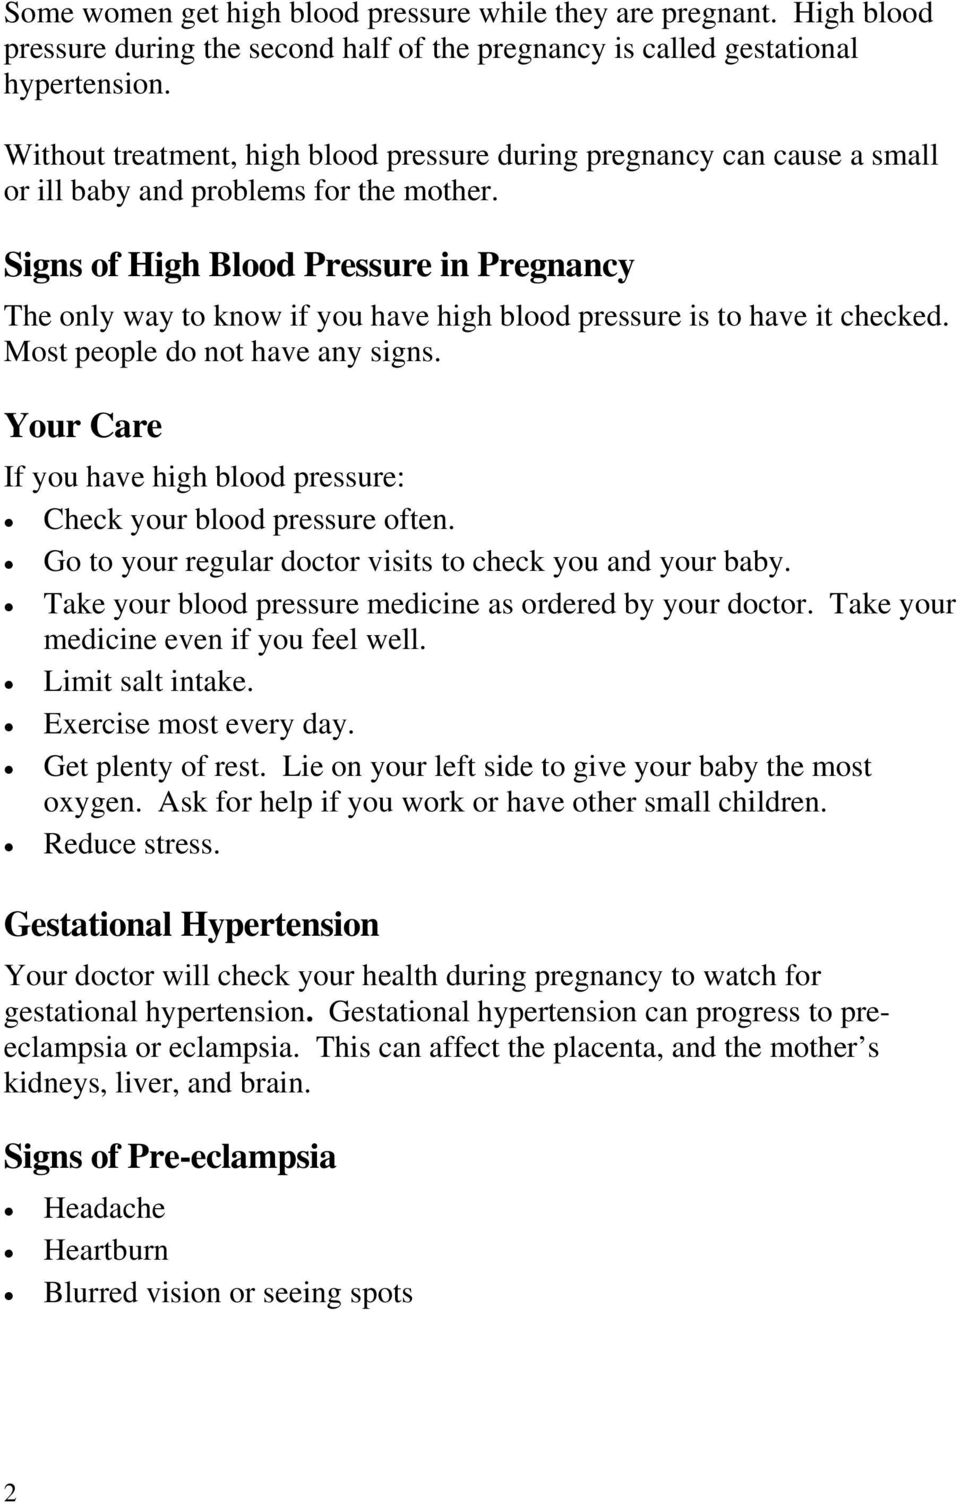 Signs of High Blood Pressure in Pregnancy The only way to know if you have high blood pressure is to have it checked. Most people do not have any signs.